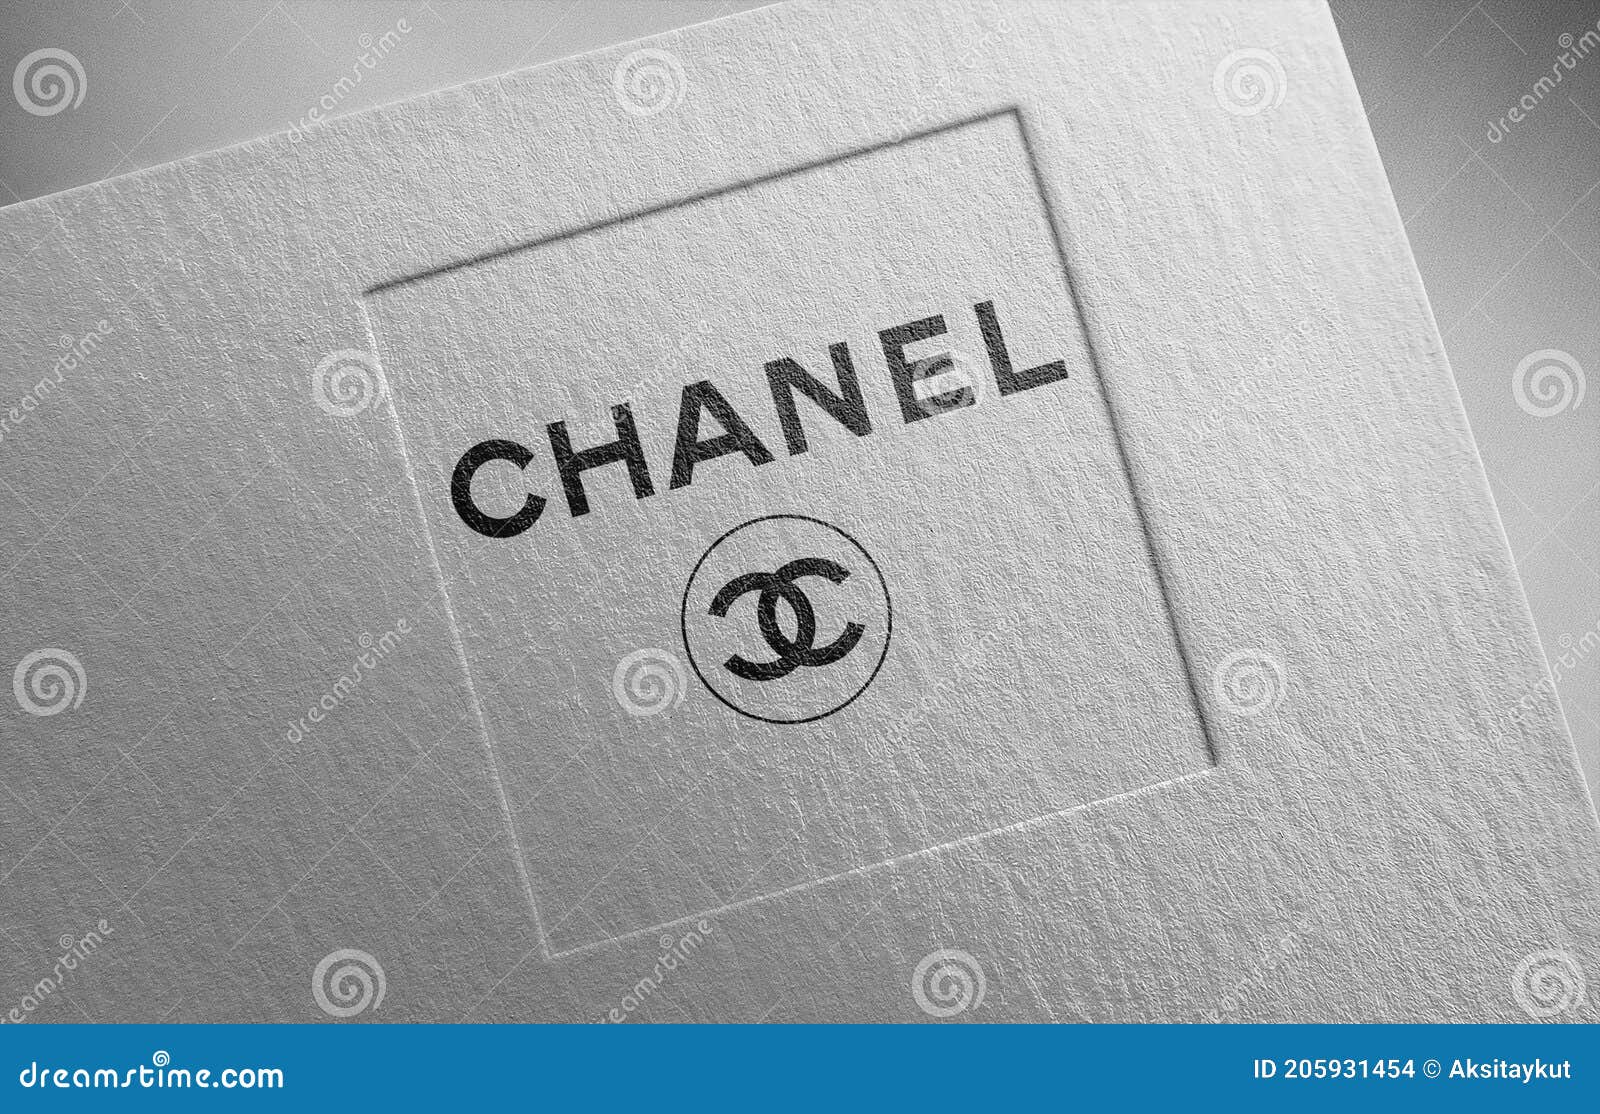 Chanel-1 on paper texture editorial stock image. Image of luxury